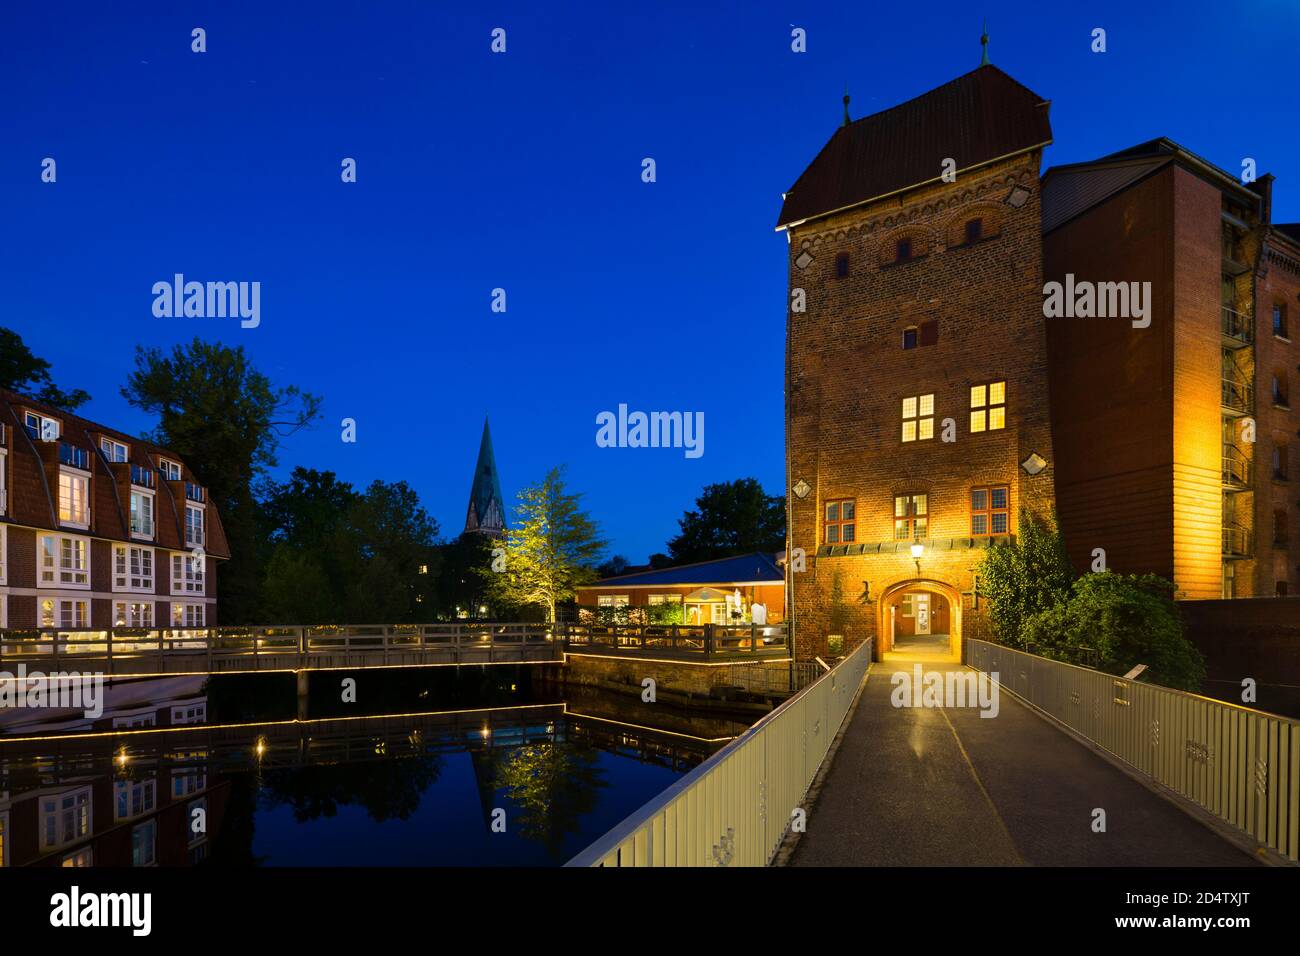 Bridge and old tower at the Ilmenau River in the old town of Lueneburg, Germany with night blue sky. Stock Photo